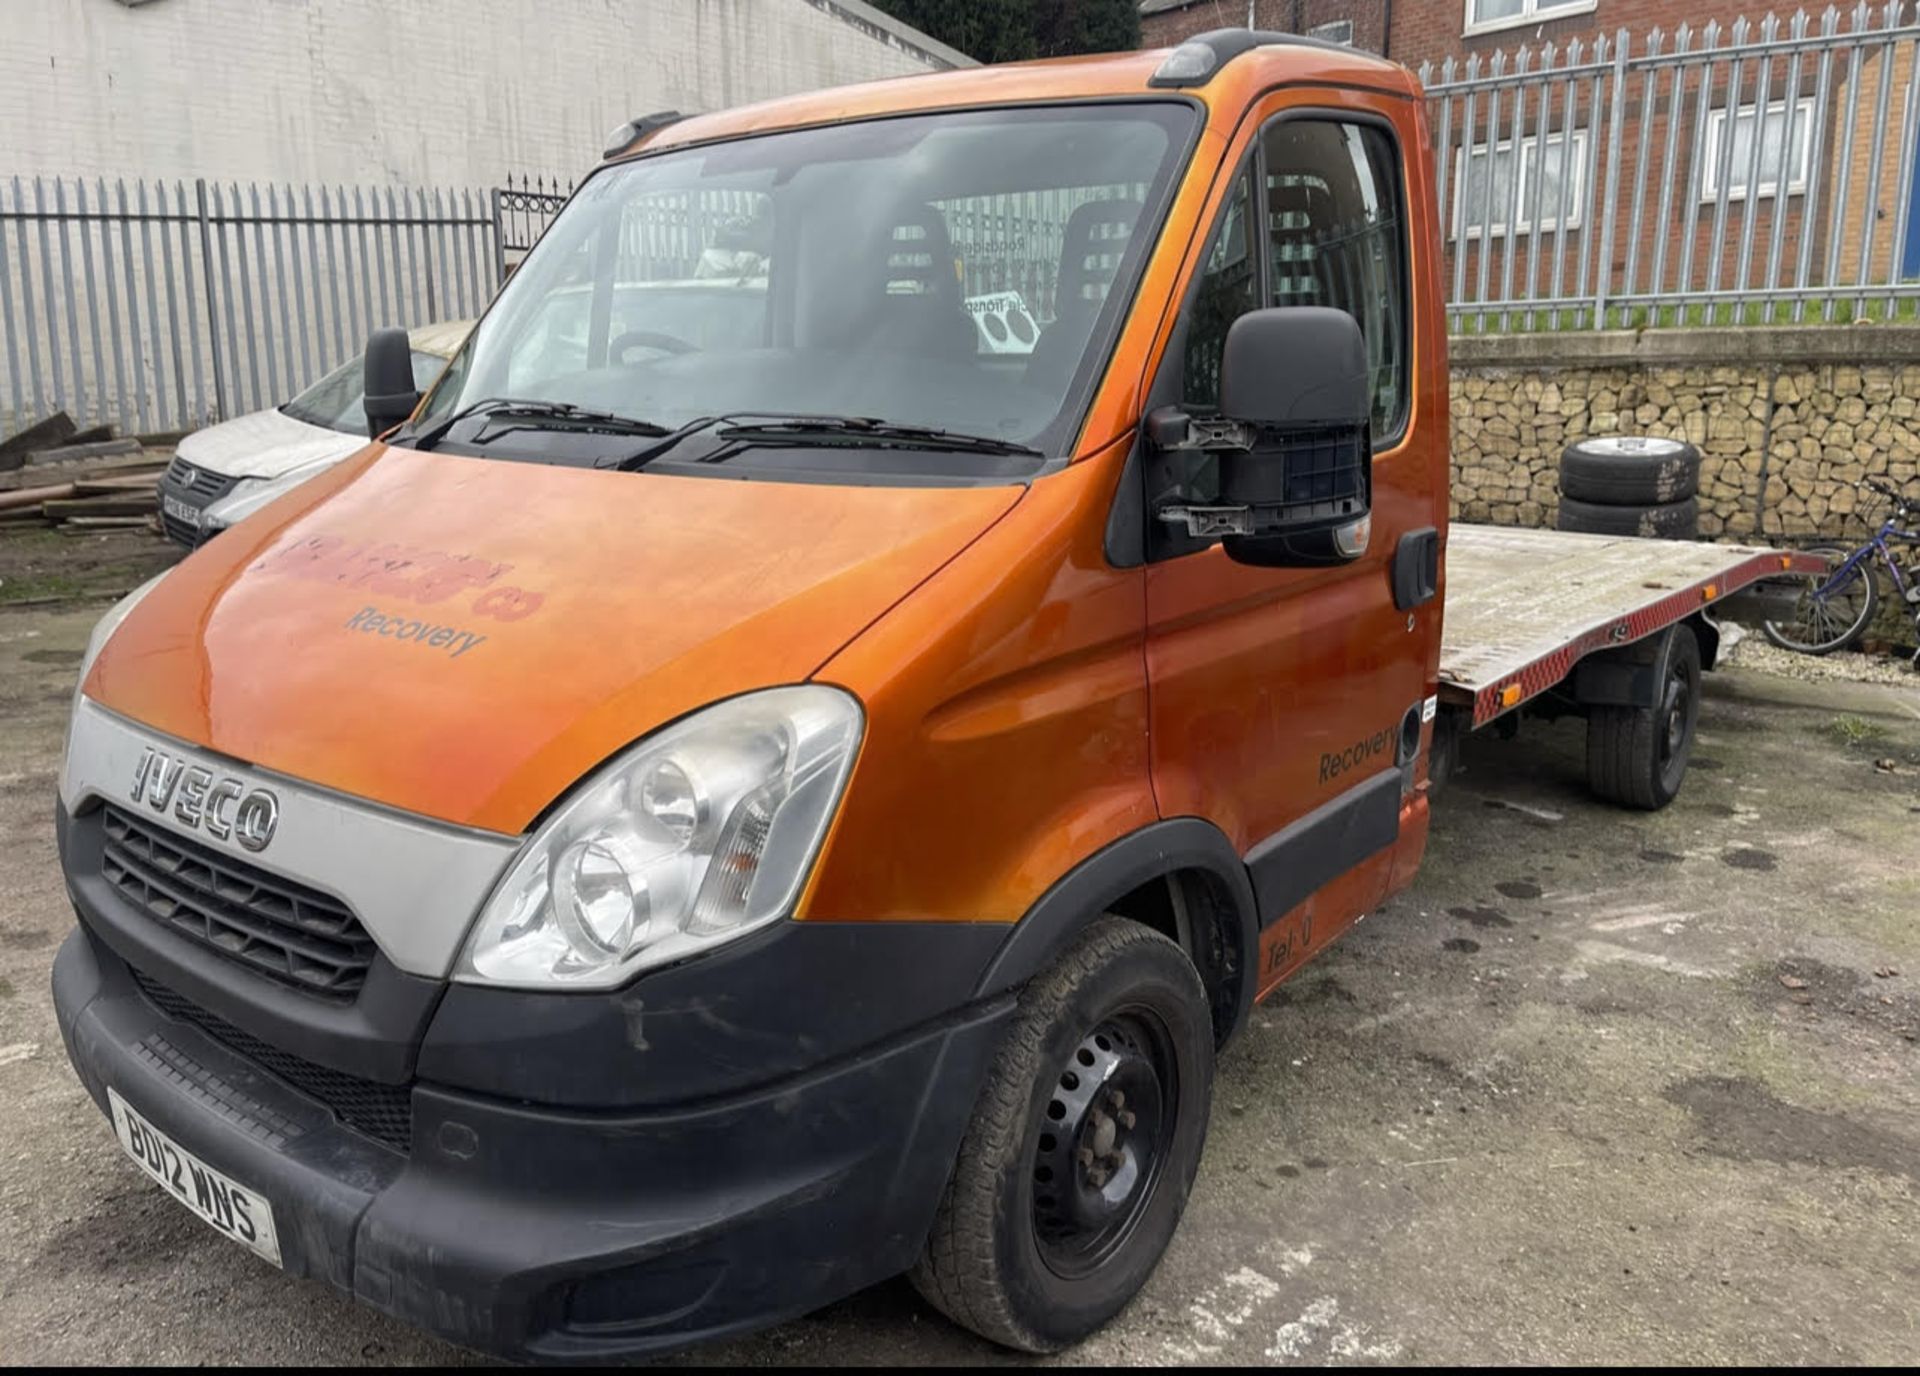 2012 IVECO DAILY 35S11 LWB ORANGE RECOVERY CHASSIS CAB *PLUS VAT* - Image 2 of 3